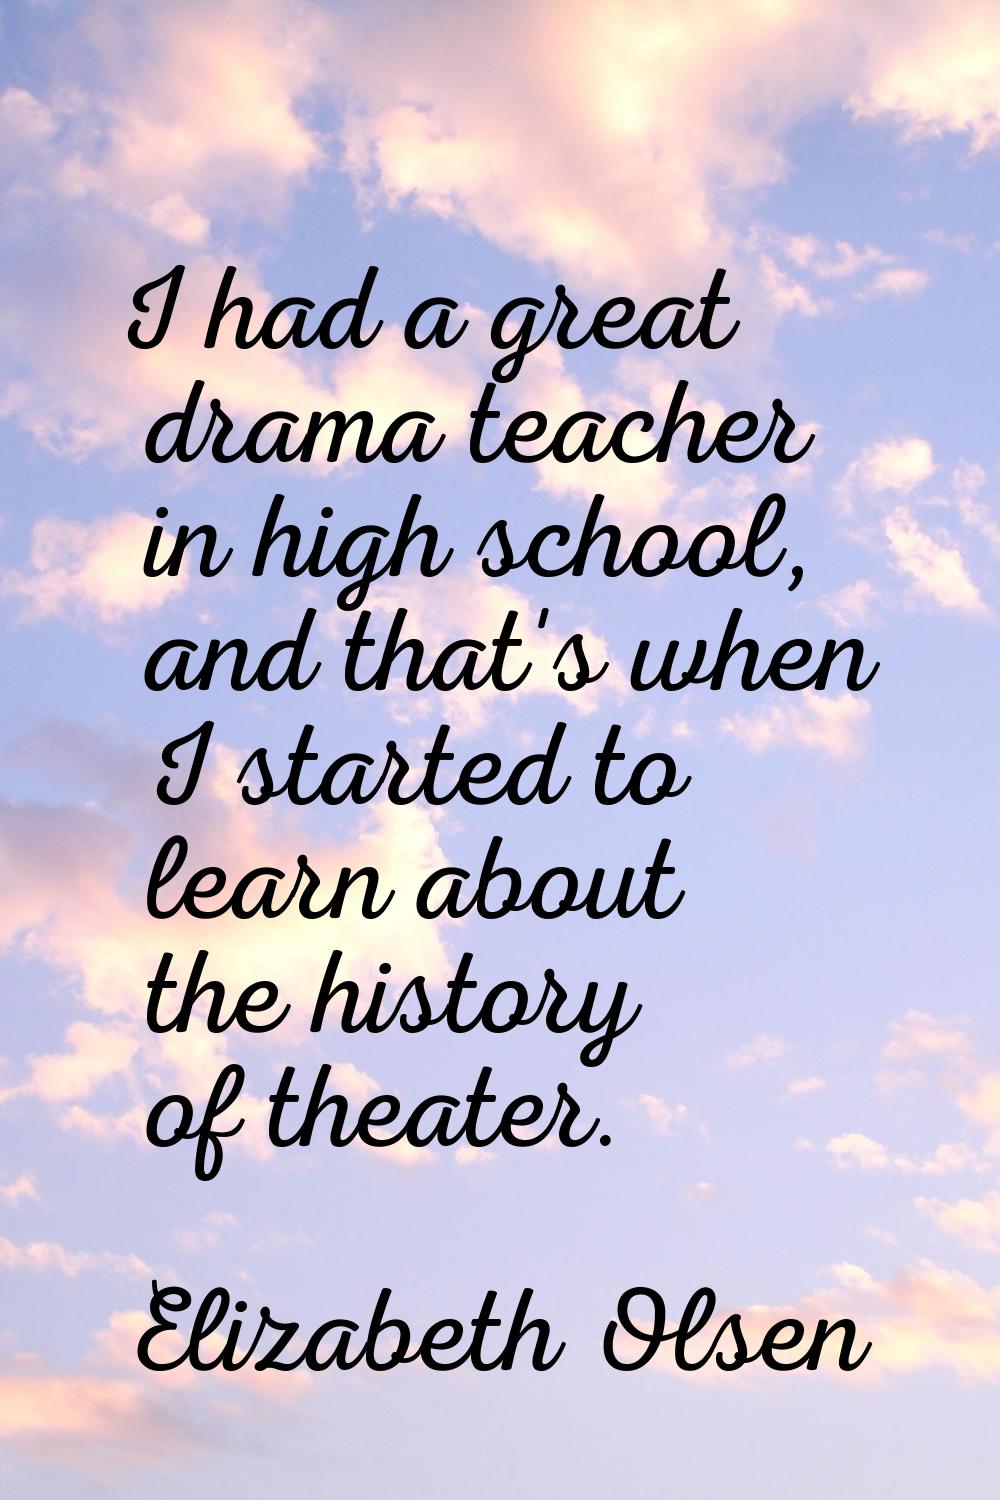 I had a great drama teacher in high school, and that's when I started to learn about the history of